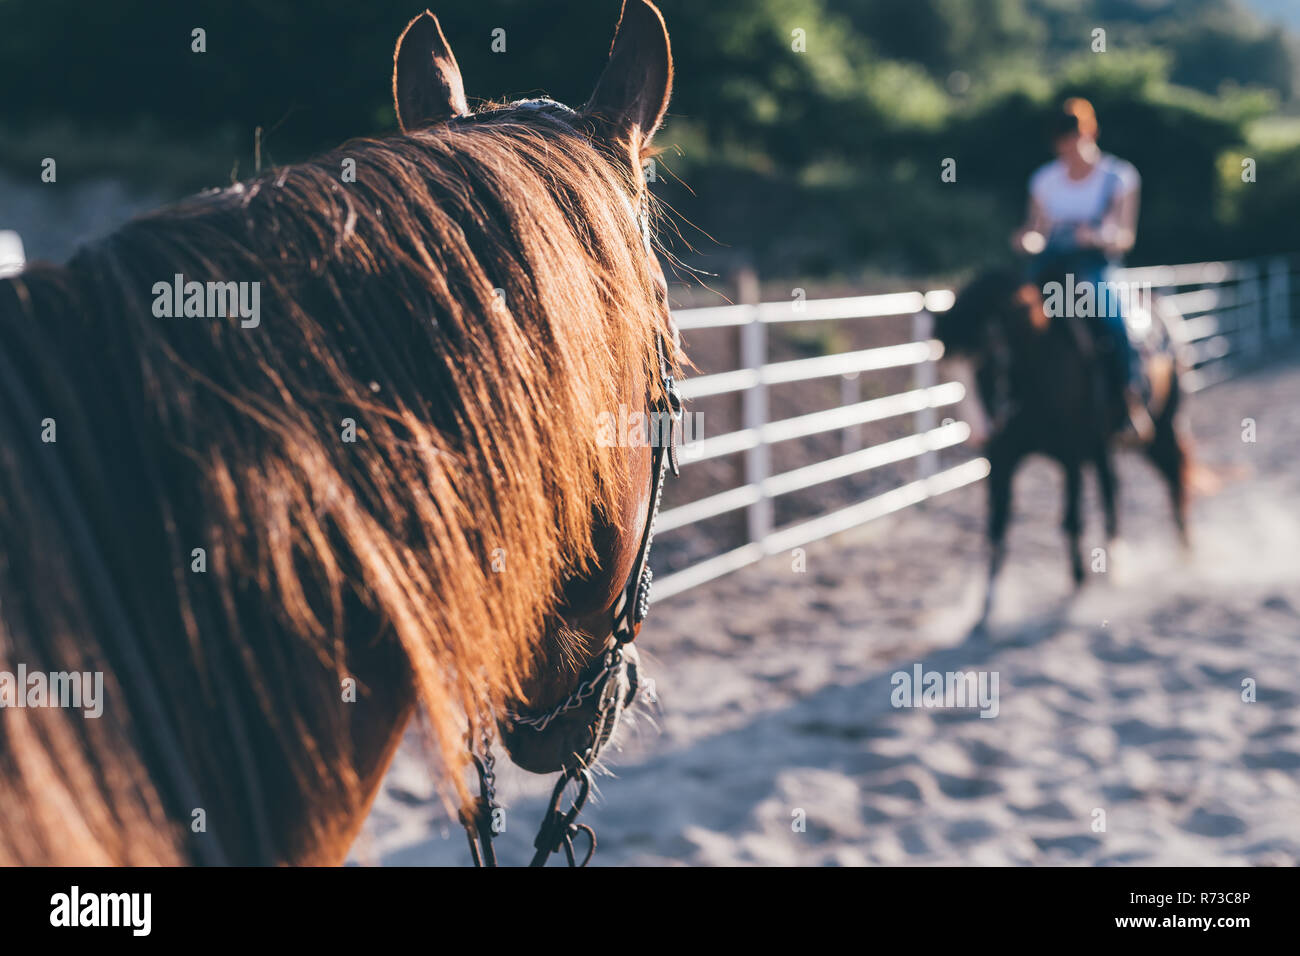 Horse riding in equestrian arena, shallow focus Stock Photo